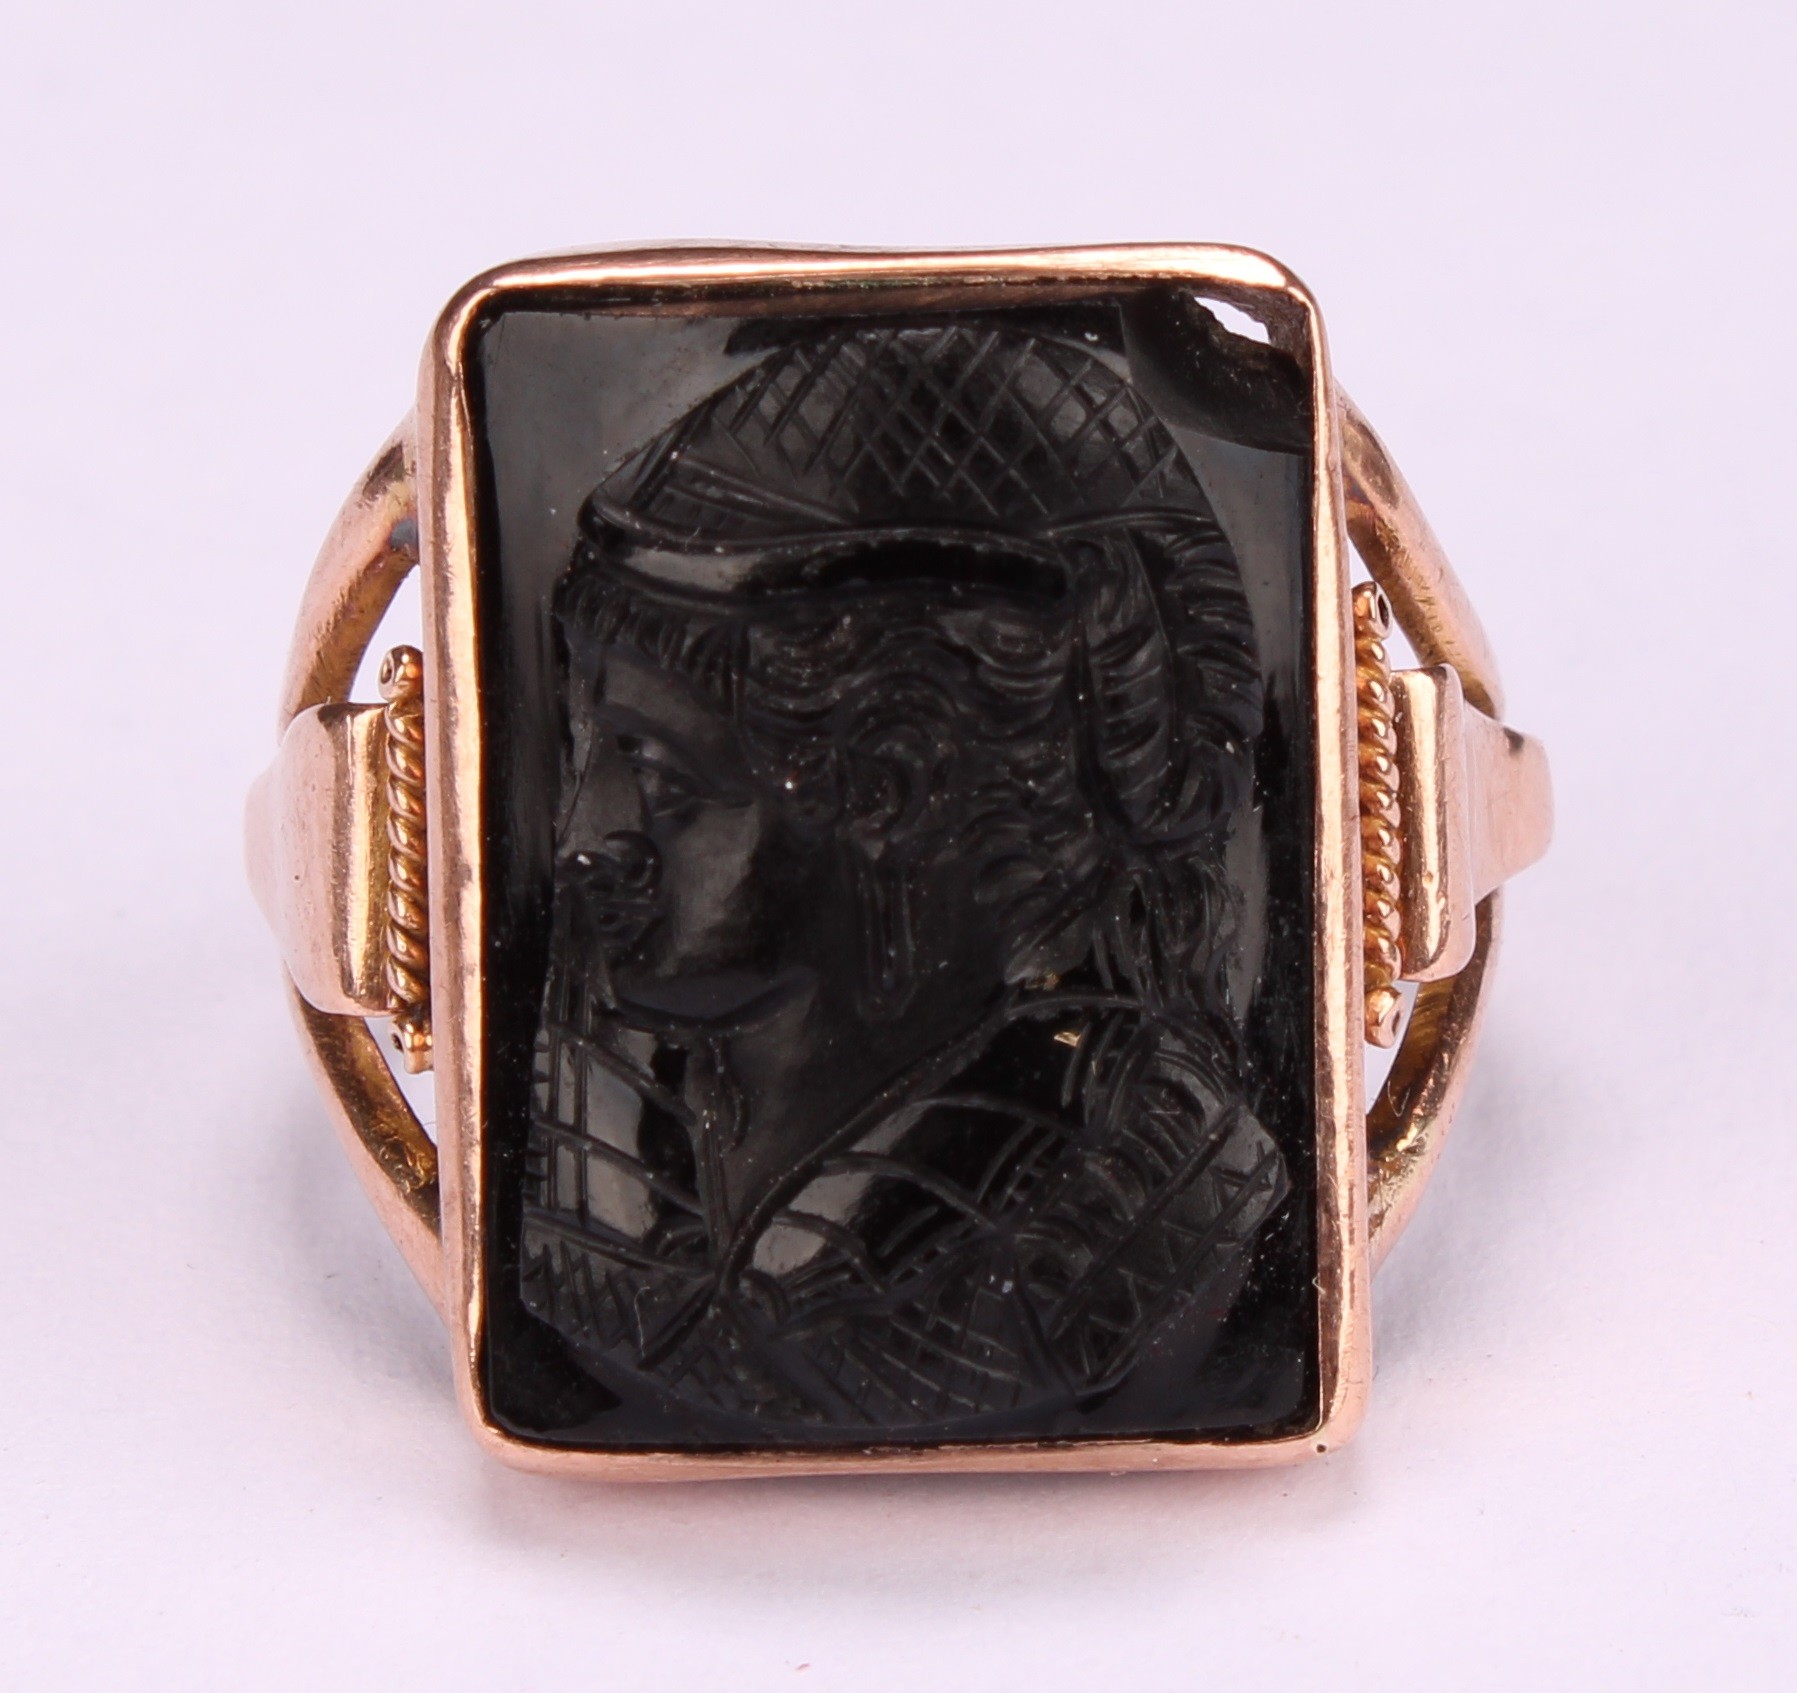 A Victorian black onyx glass mourning ring, rectangular cameo panel bust portrait of a figure with - Image 4 of 4